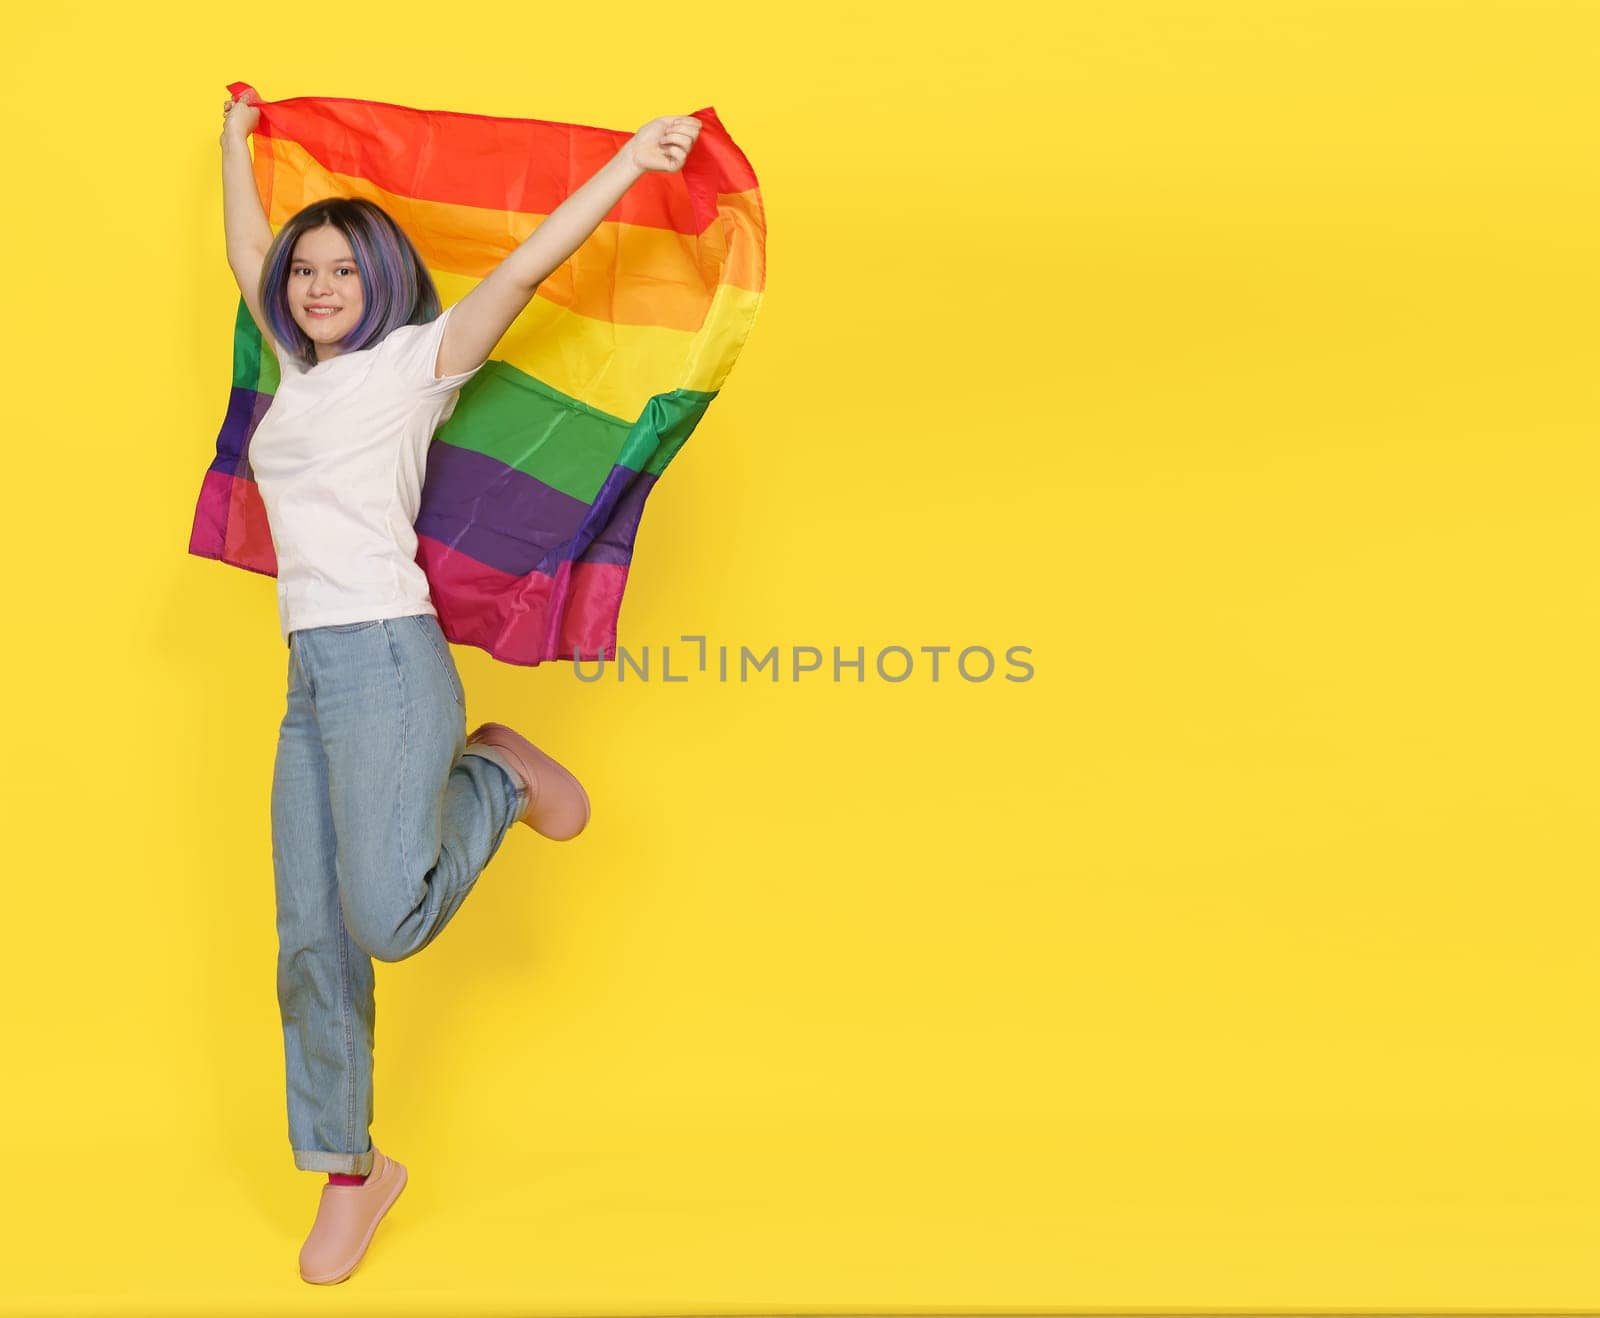 Sense Of Freedom, Equality, and LGBTQ Pride Right Of Any Person To Choose Sexual Orientation. Happy And Smiling Girl Jumps With Rainbow Flag. Isolated On Yellow Background With Copy Space. High quality photo